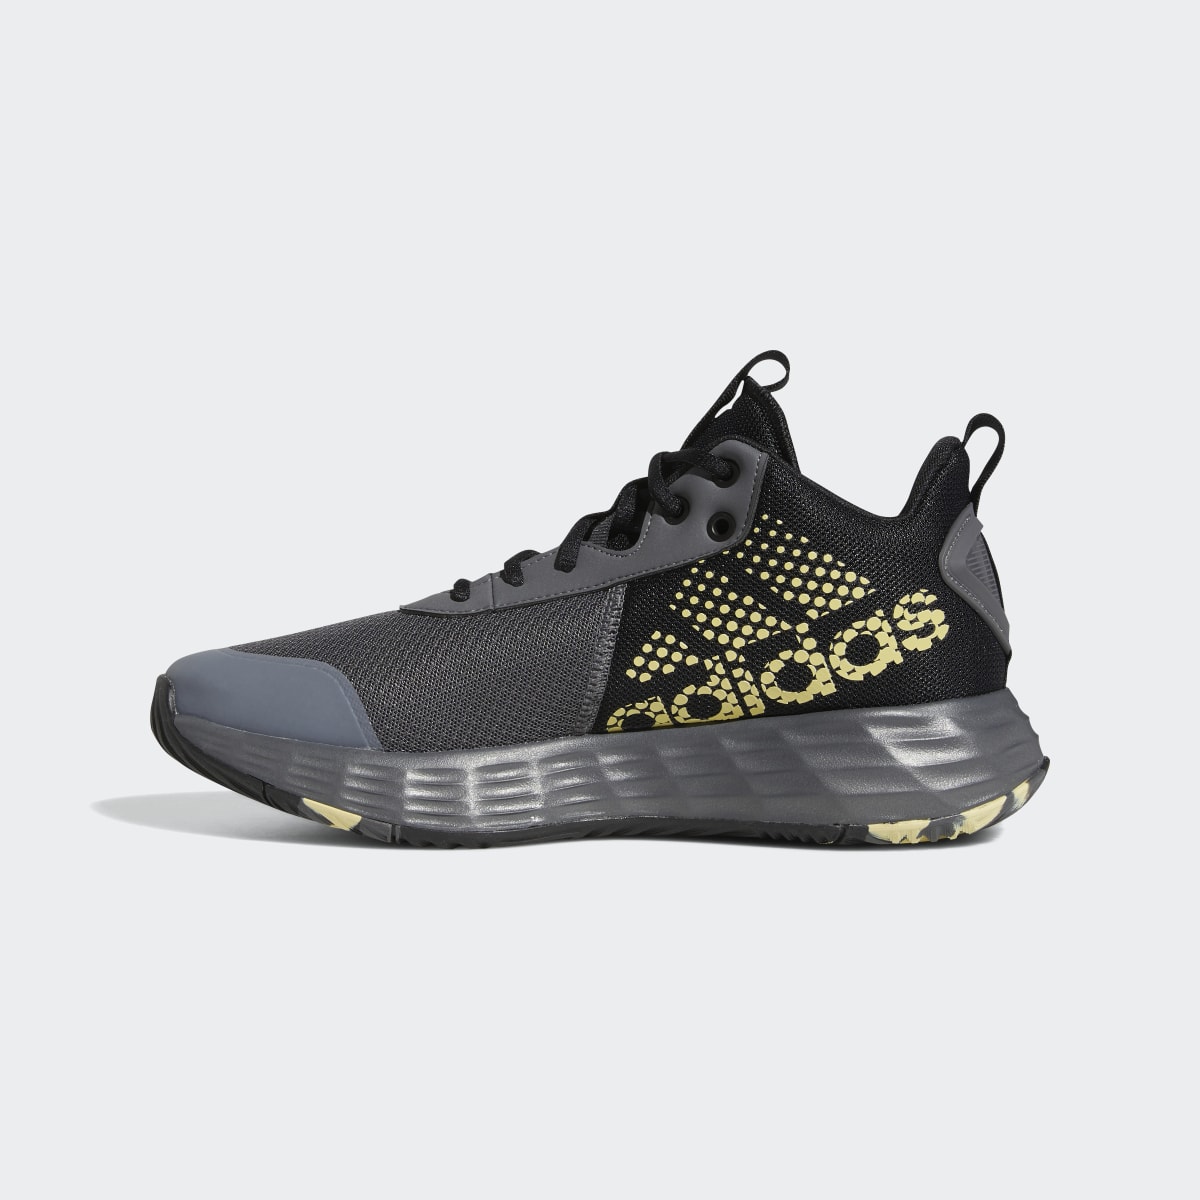 Adidas Ownthegame Basketball Shoes. 7